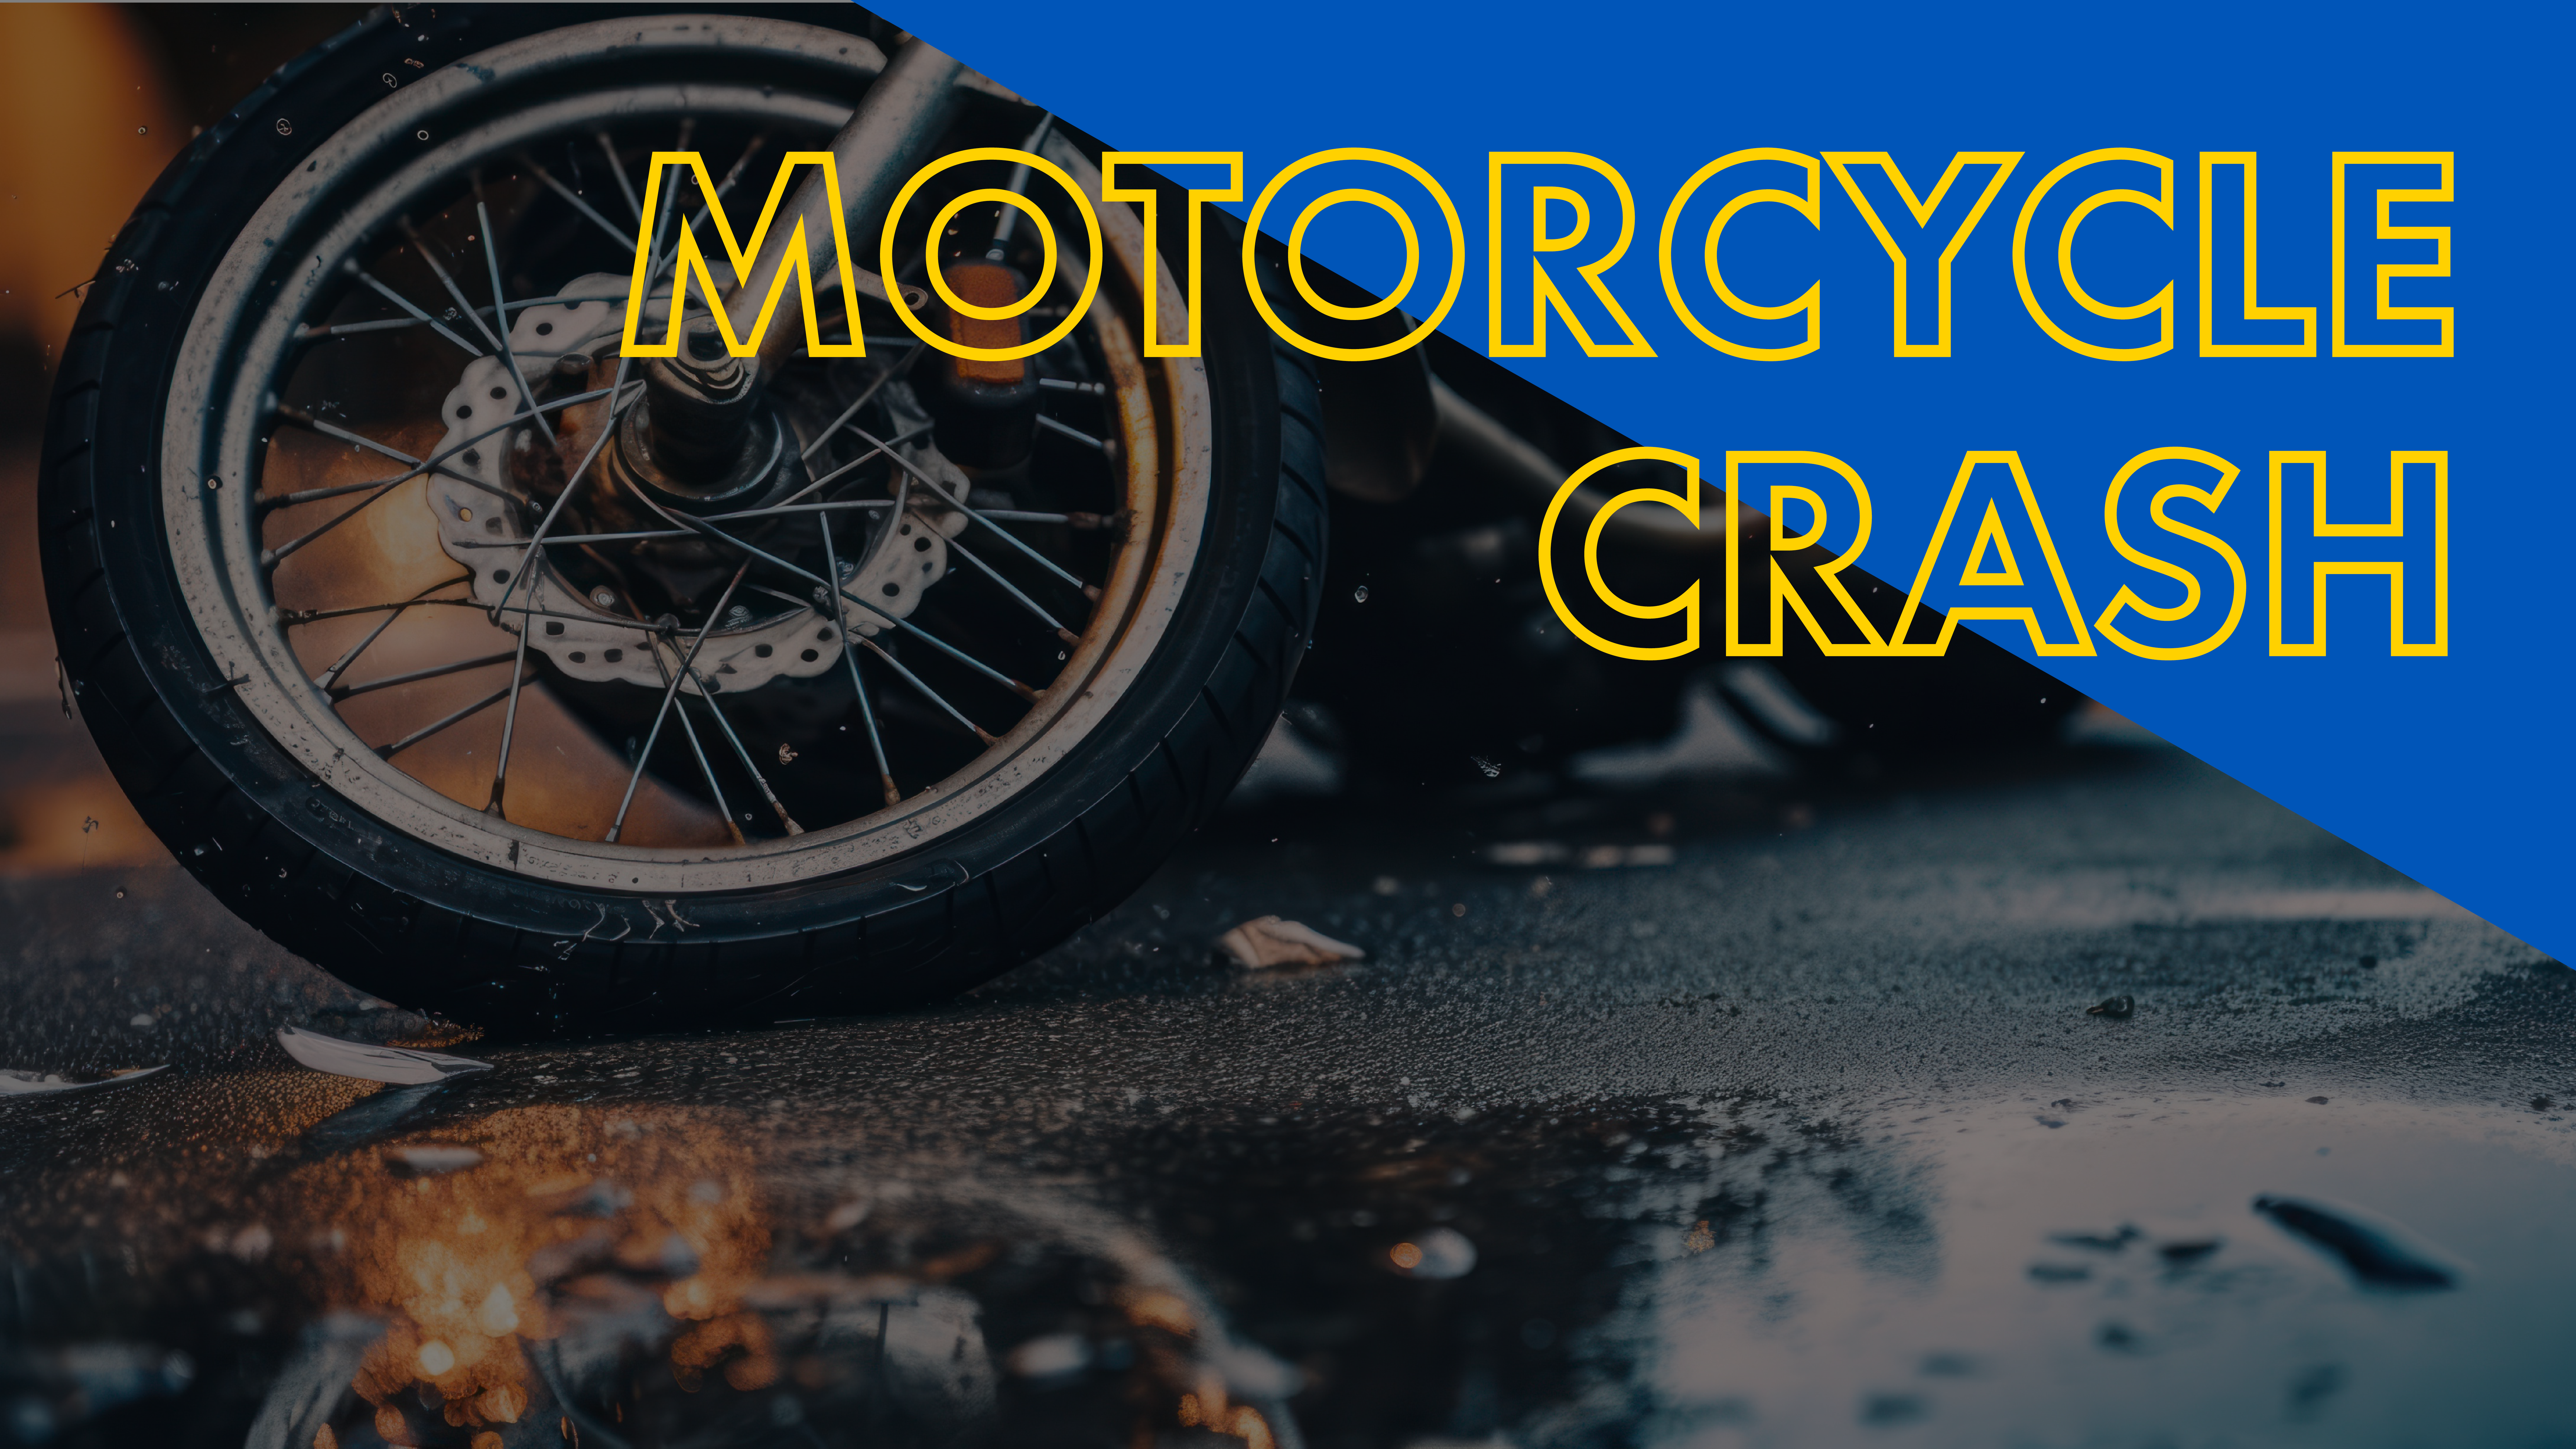 Motorcyclist in serious condition after crash